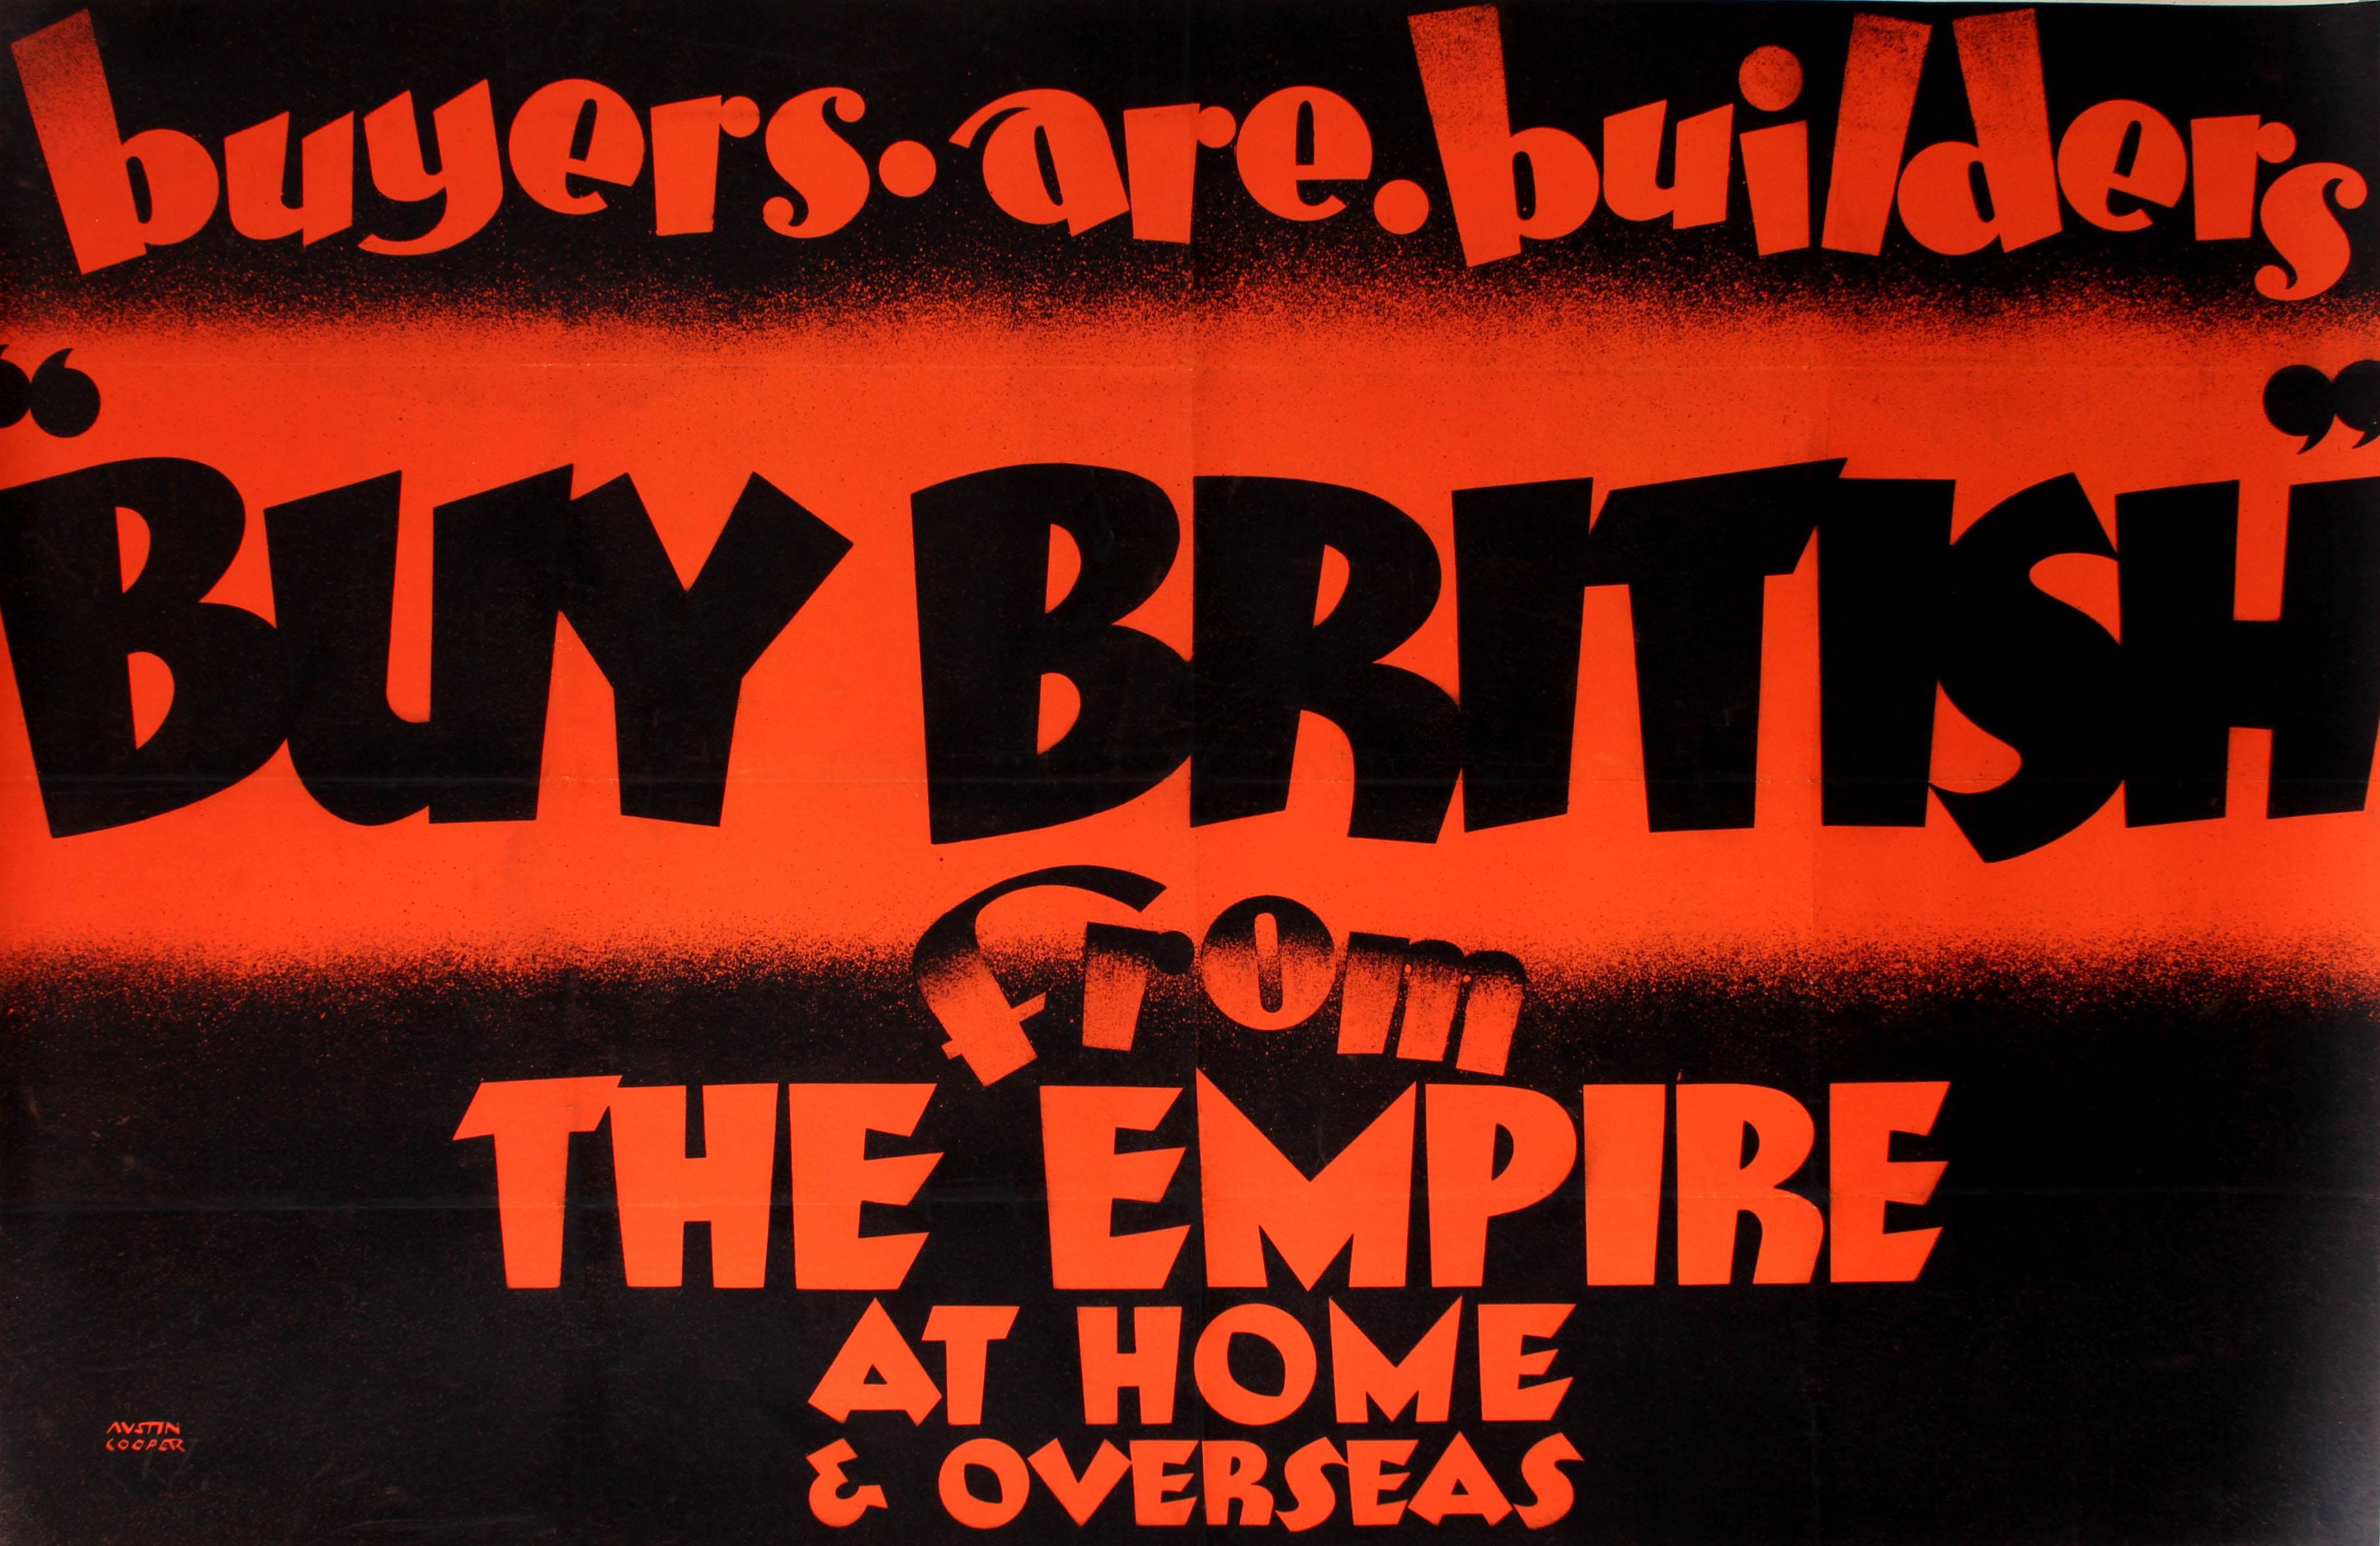 Original vintage advertising poster issued by the Empire Marketing Board to encourage British citizens to help their own economy following the Great Depression in America by buying British goods. Great design by one of England's leading poster